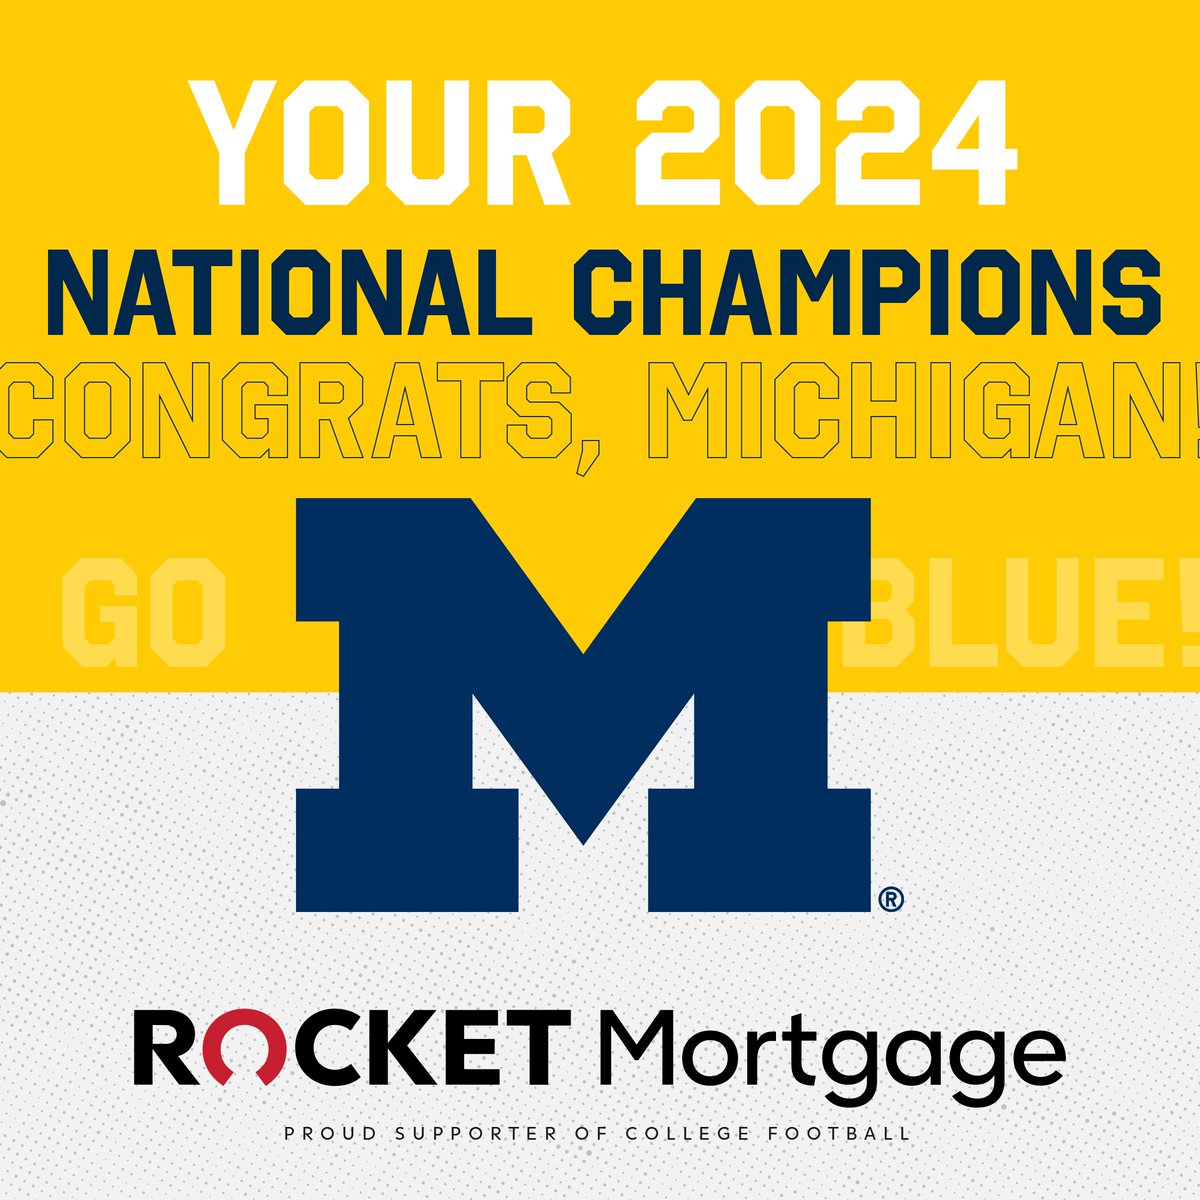 Michigan just rolled to victory and are taking home the trophy. Congrats! #GoBlue NMLS #3030